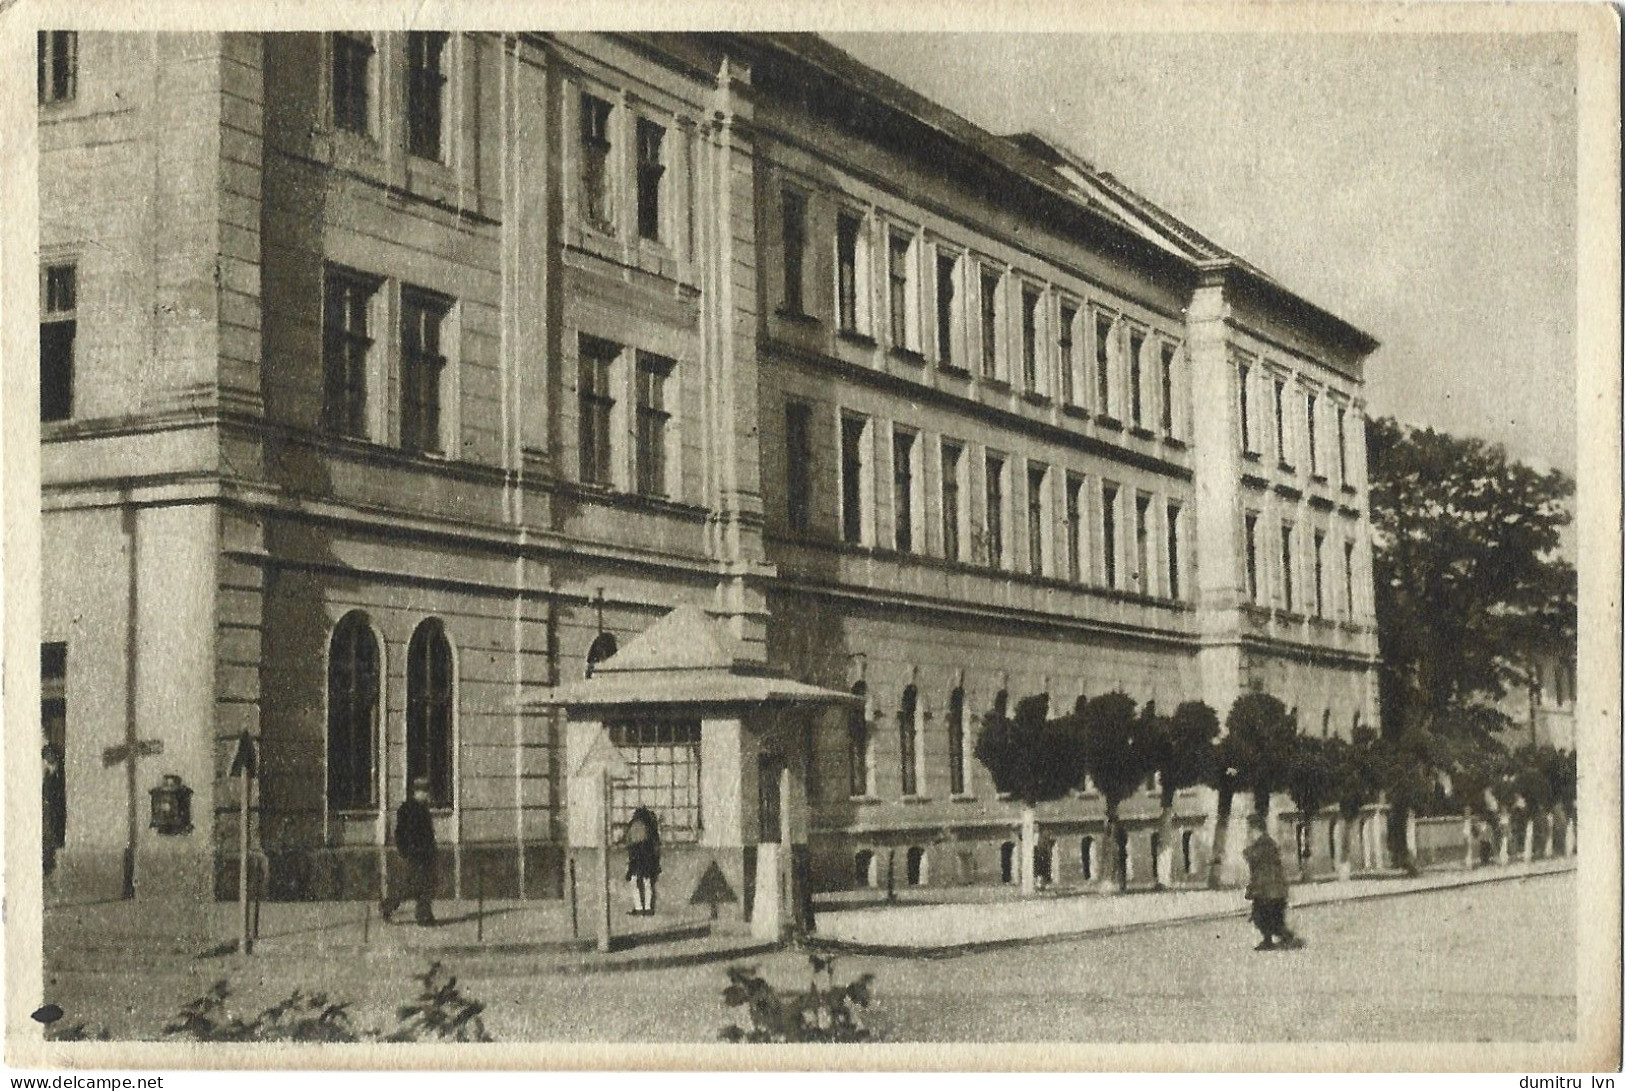 ROMANIA SFANTU GHEORGHE - THE HUNGARIAN HIGH SCHOOL BUILDING, ARCHITECTURE, PEOPLE POSTAGE DUE - Port Dû (Taxe)